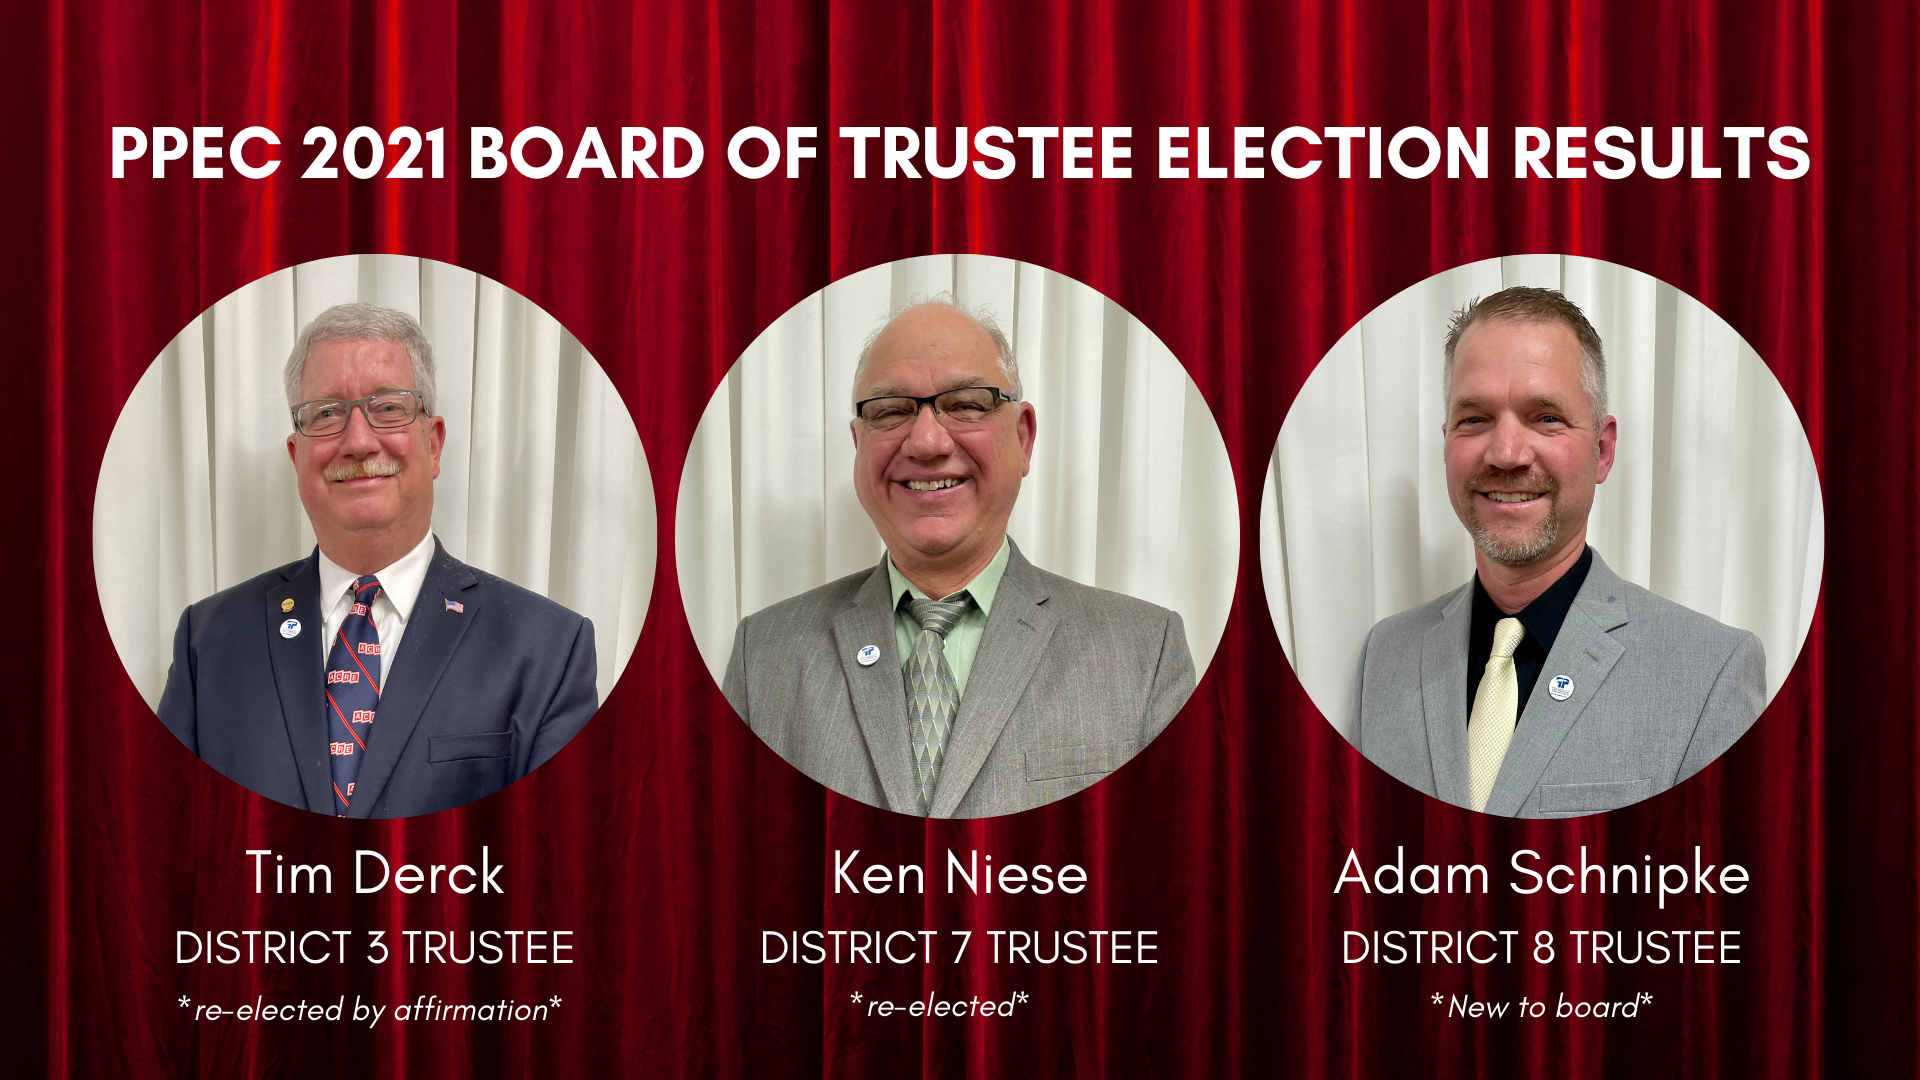 2021 PPEC board of trustee election results